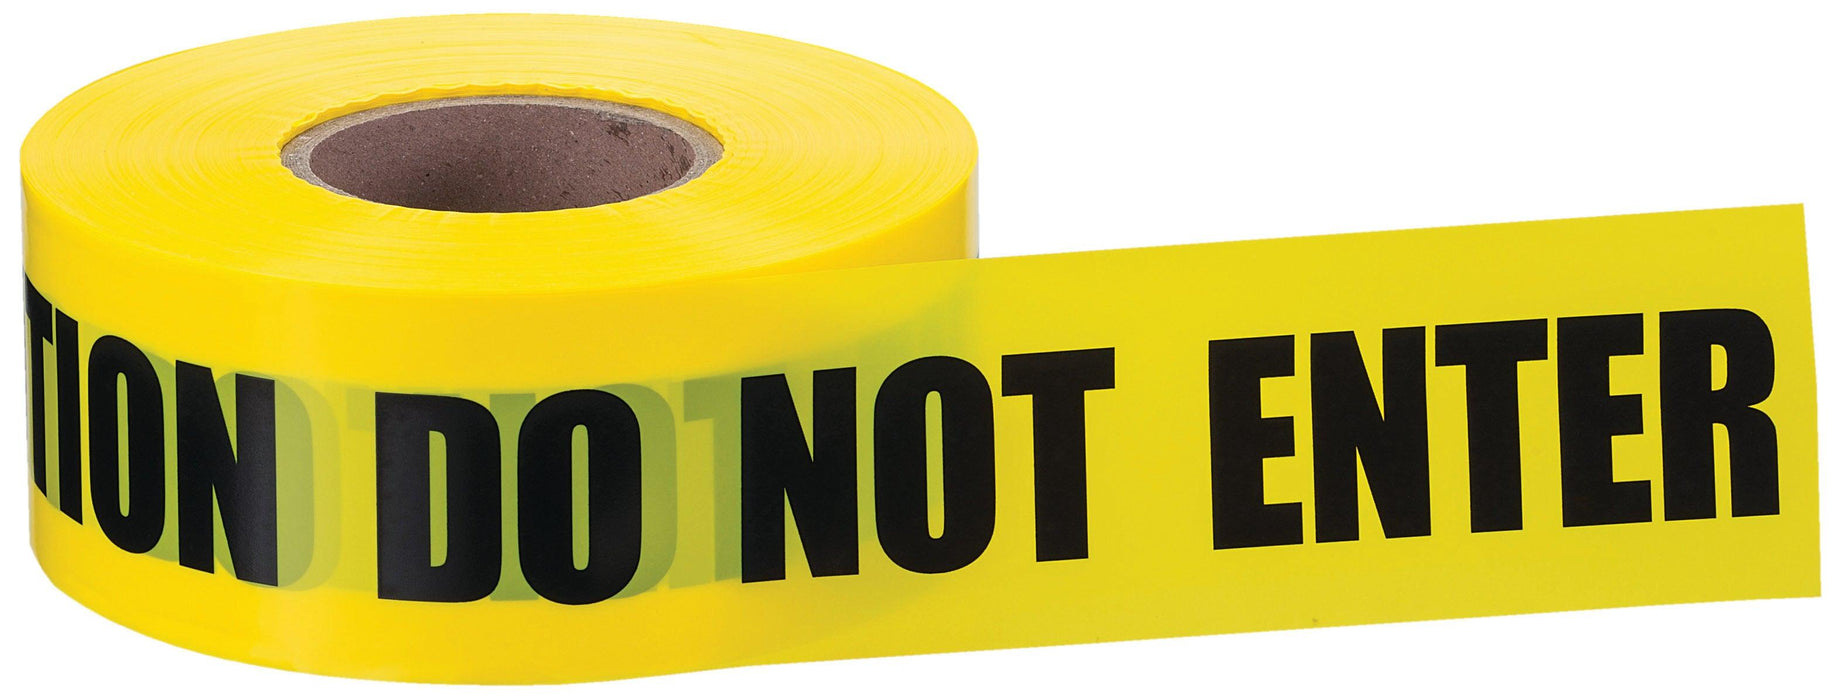 IDEAL "Caution Do Not Enter" Yellow Barricade Tape, Model 42-002* - Orka